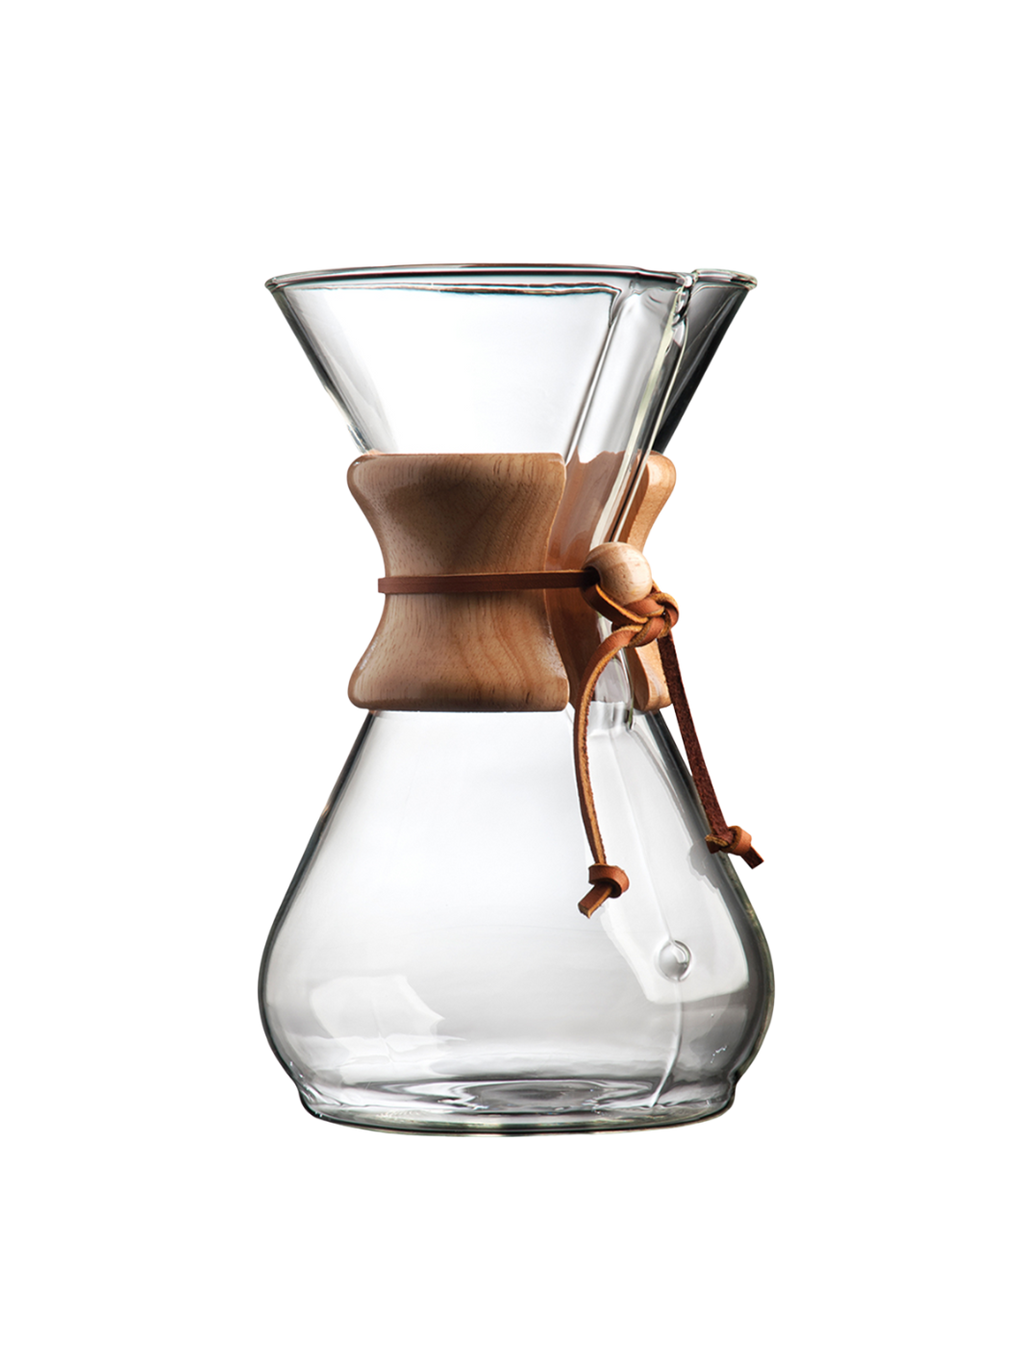 Chemex Classic Pour Over Coffee Maker